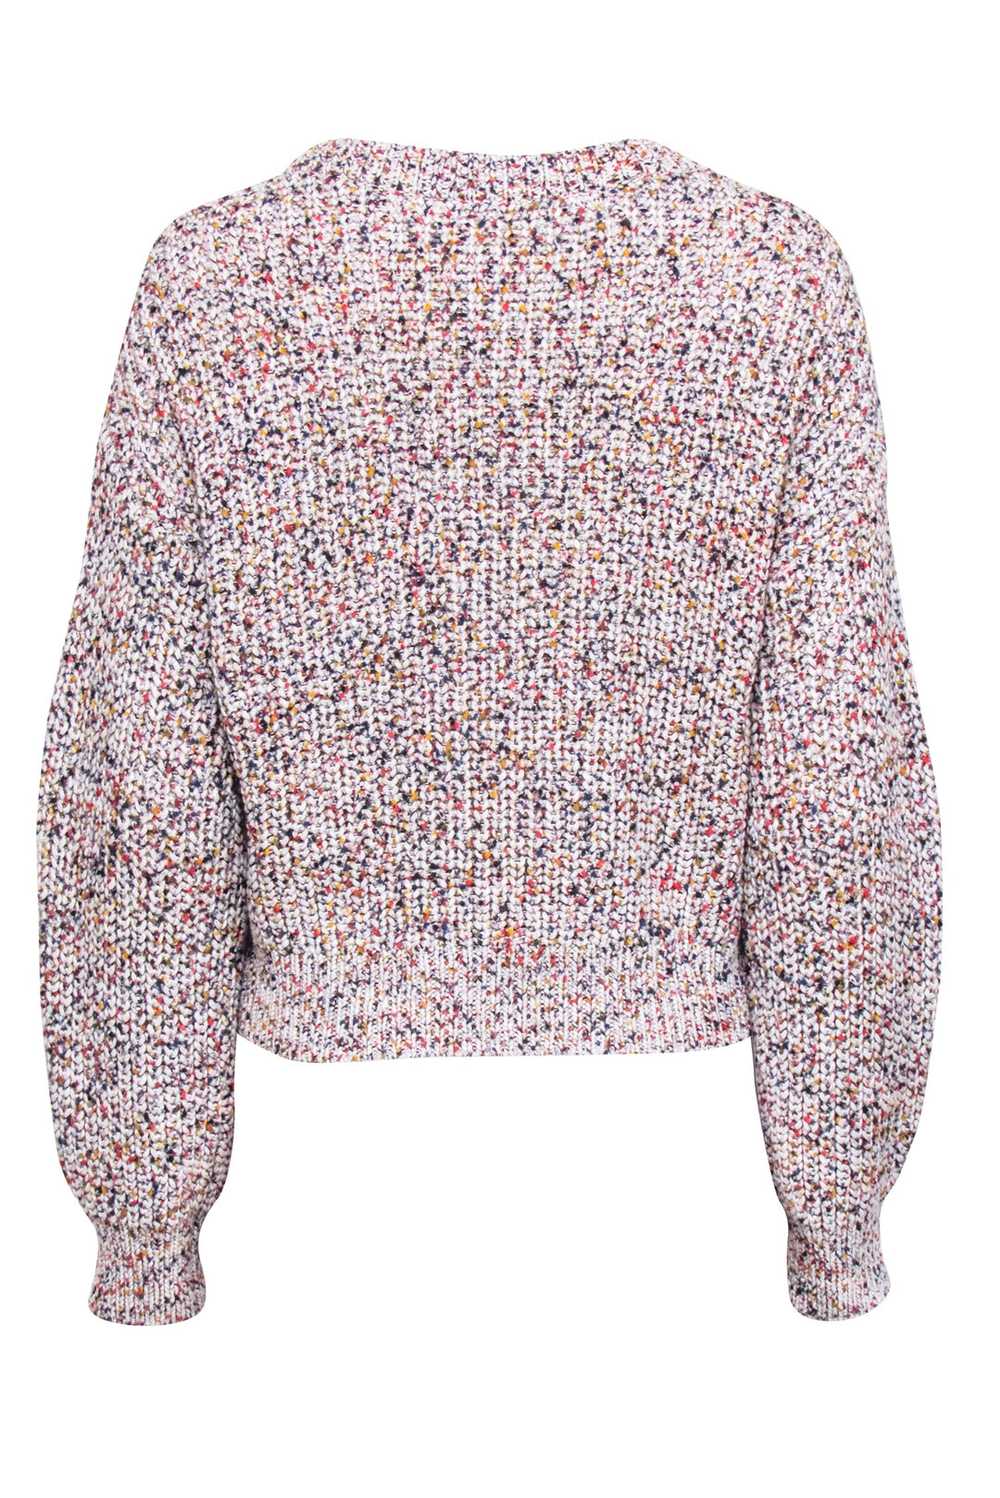 Veronica Beard - White Multicolor Speckled Knit "… - image 3